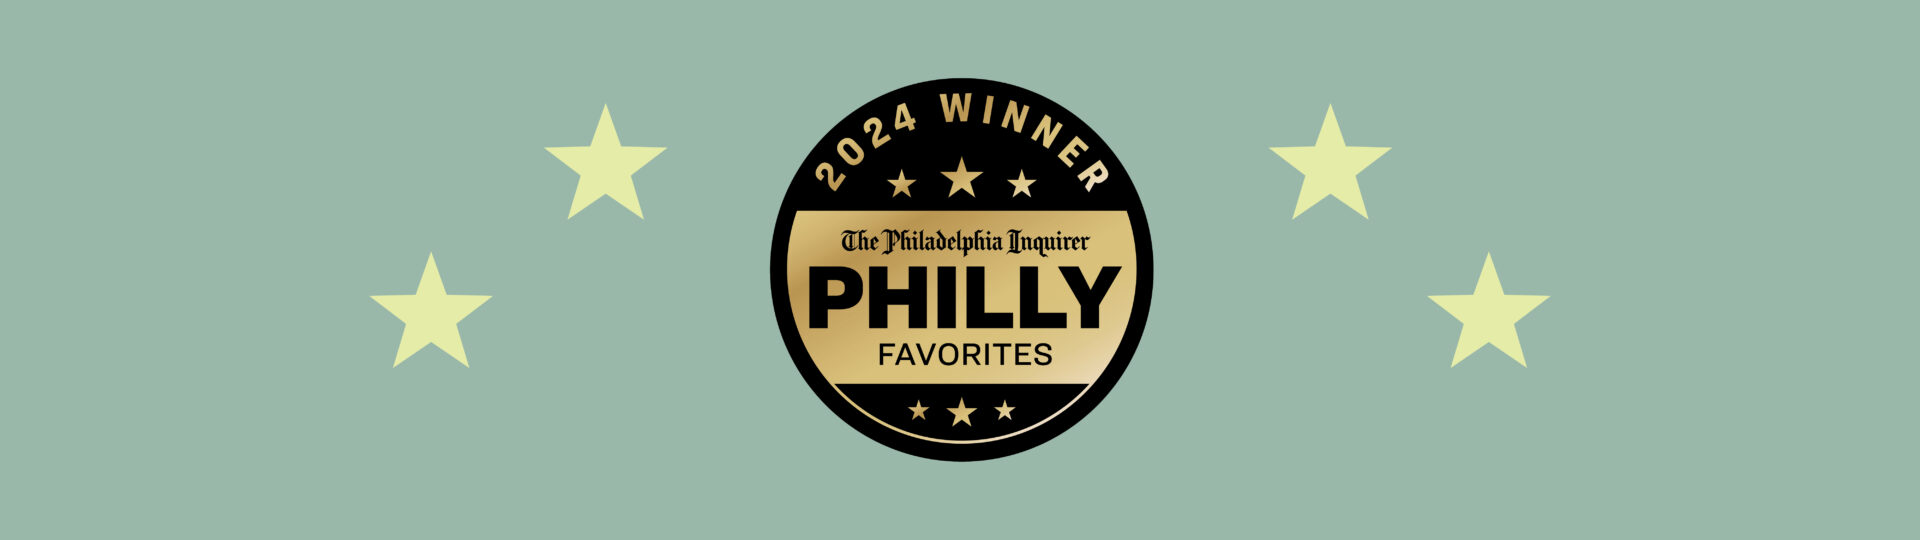 Nochumson P.C. Awarded Gold Winner in Business Law By The Philadelphia Inquirer’s Philly Favorites Contest